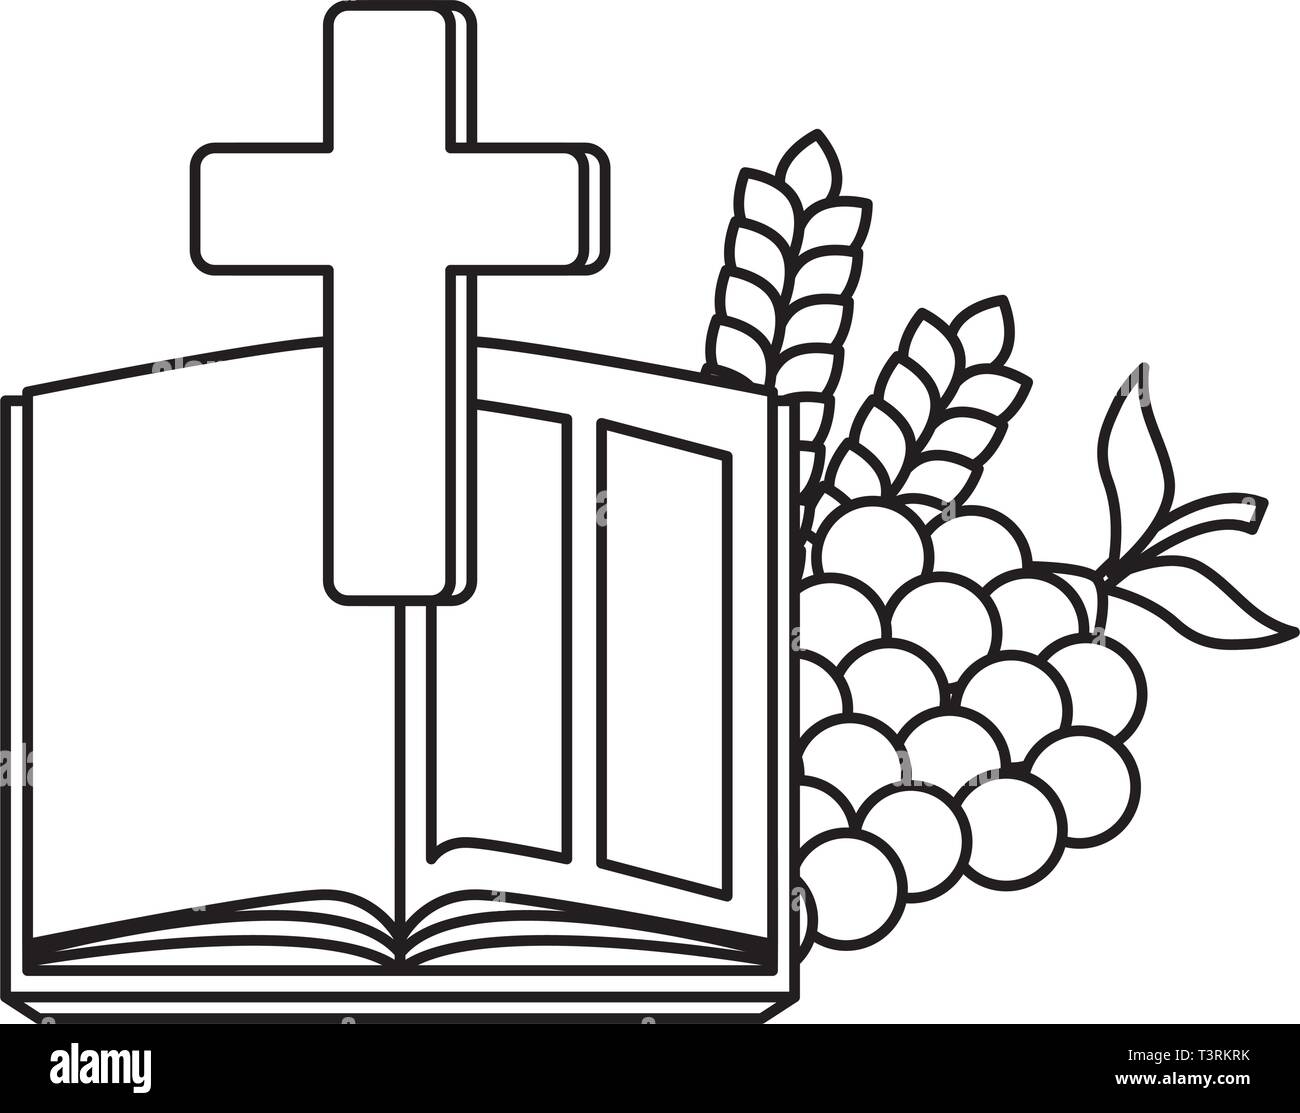 holy bible and cross clipart